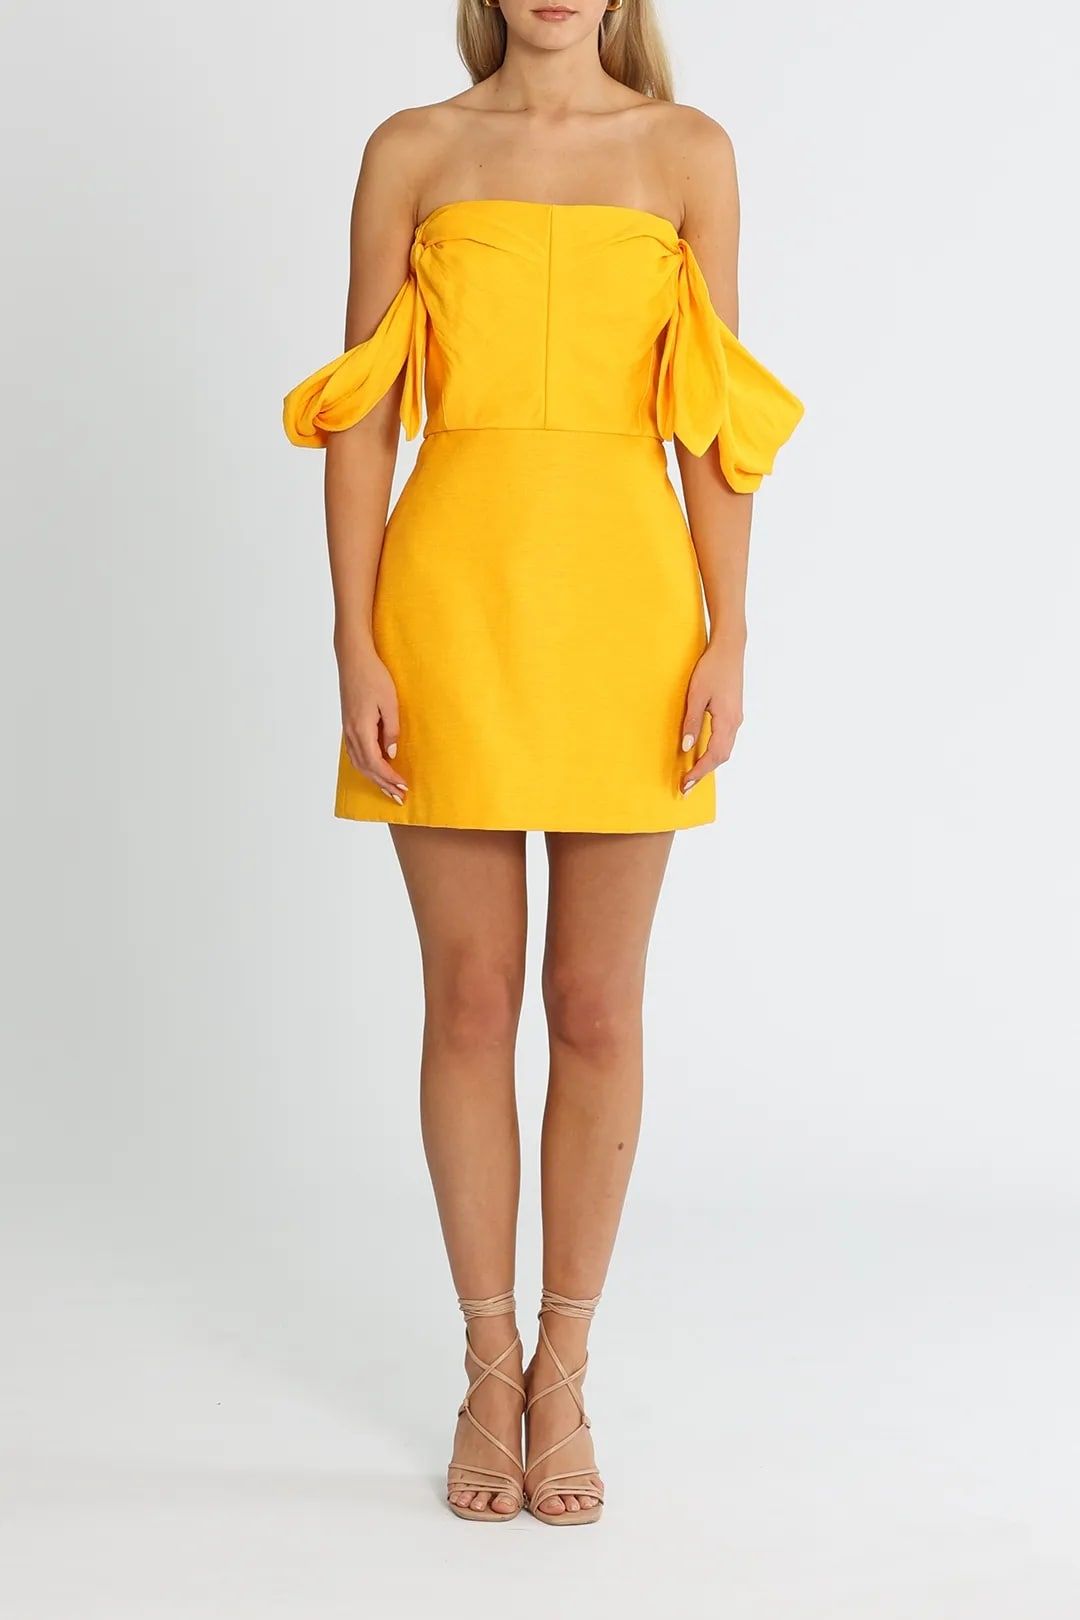 Acler Selkin Dress in Citrus, perfect for summer, available for hire